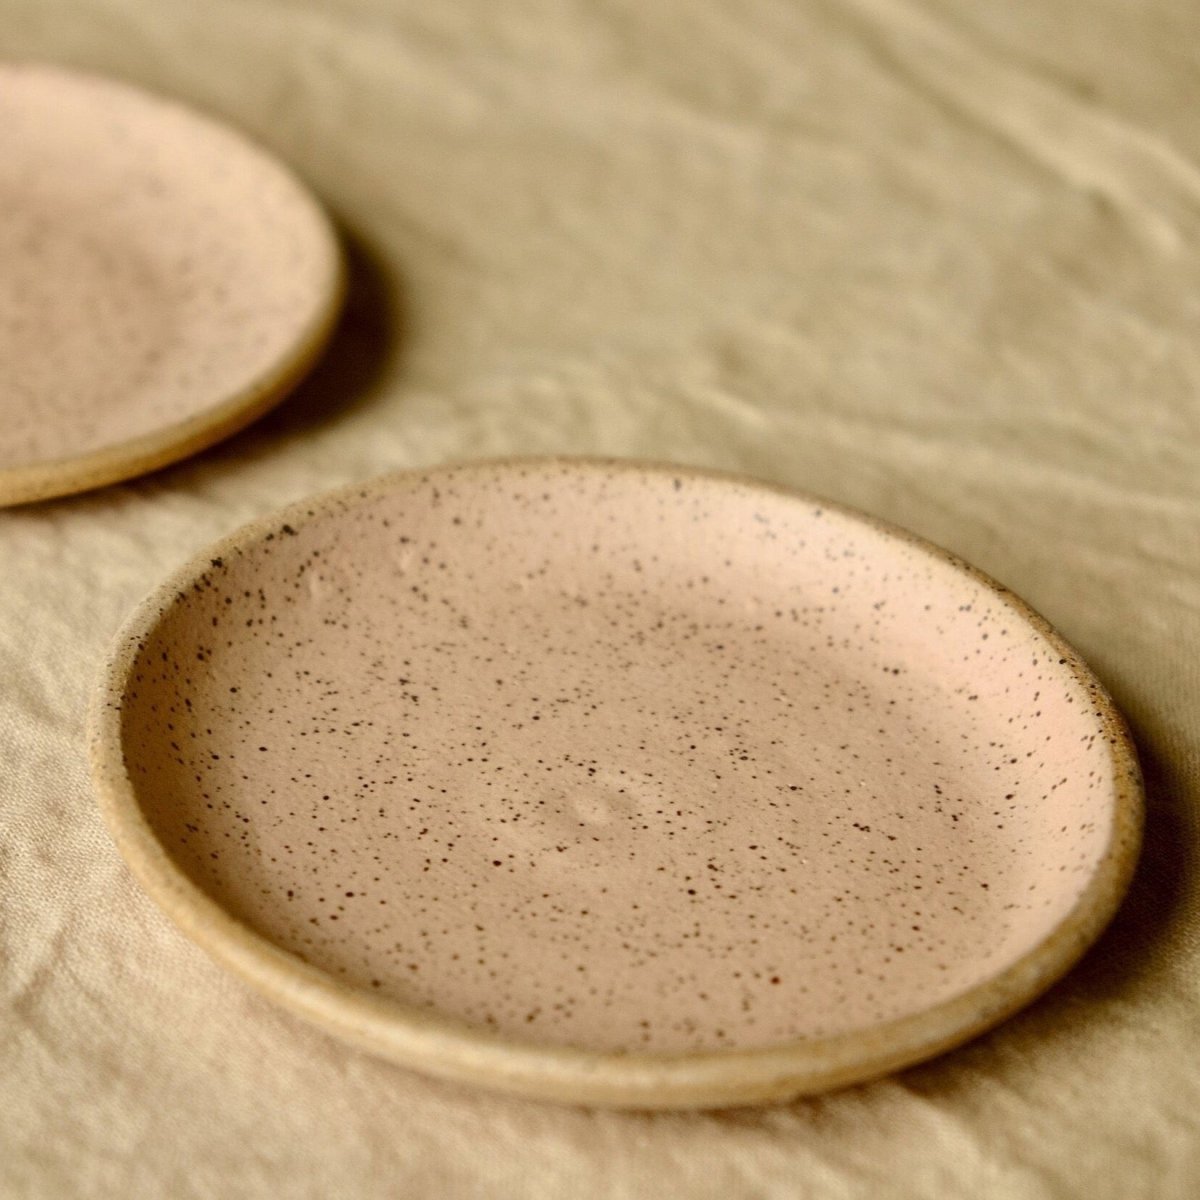 Wheel thrown ceramic ring dish with an interior blush pink matte glaze finish. Designed and handmade by Sunflower Studio in Portland, Oregon.